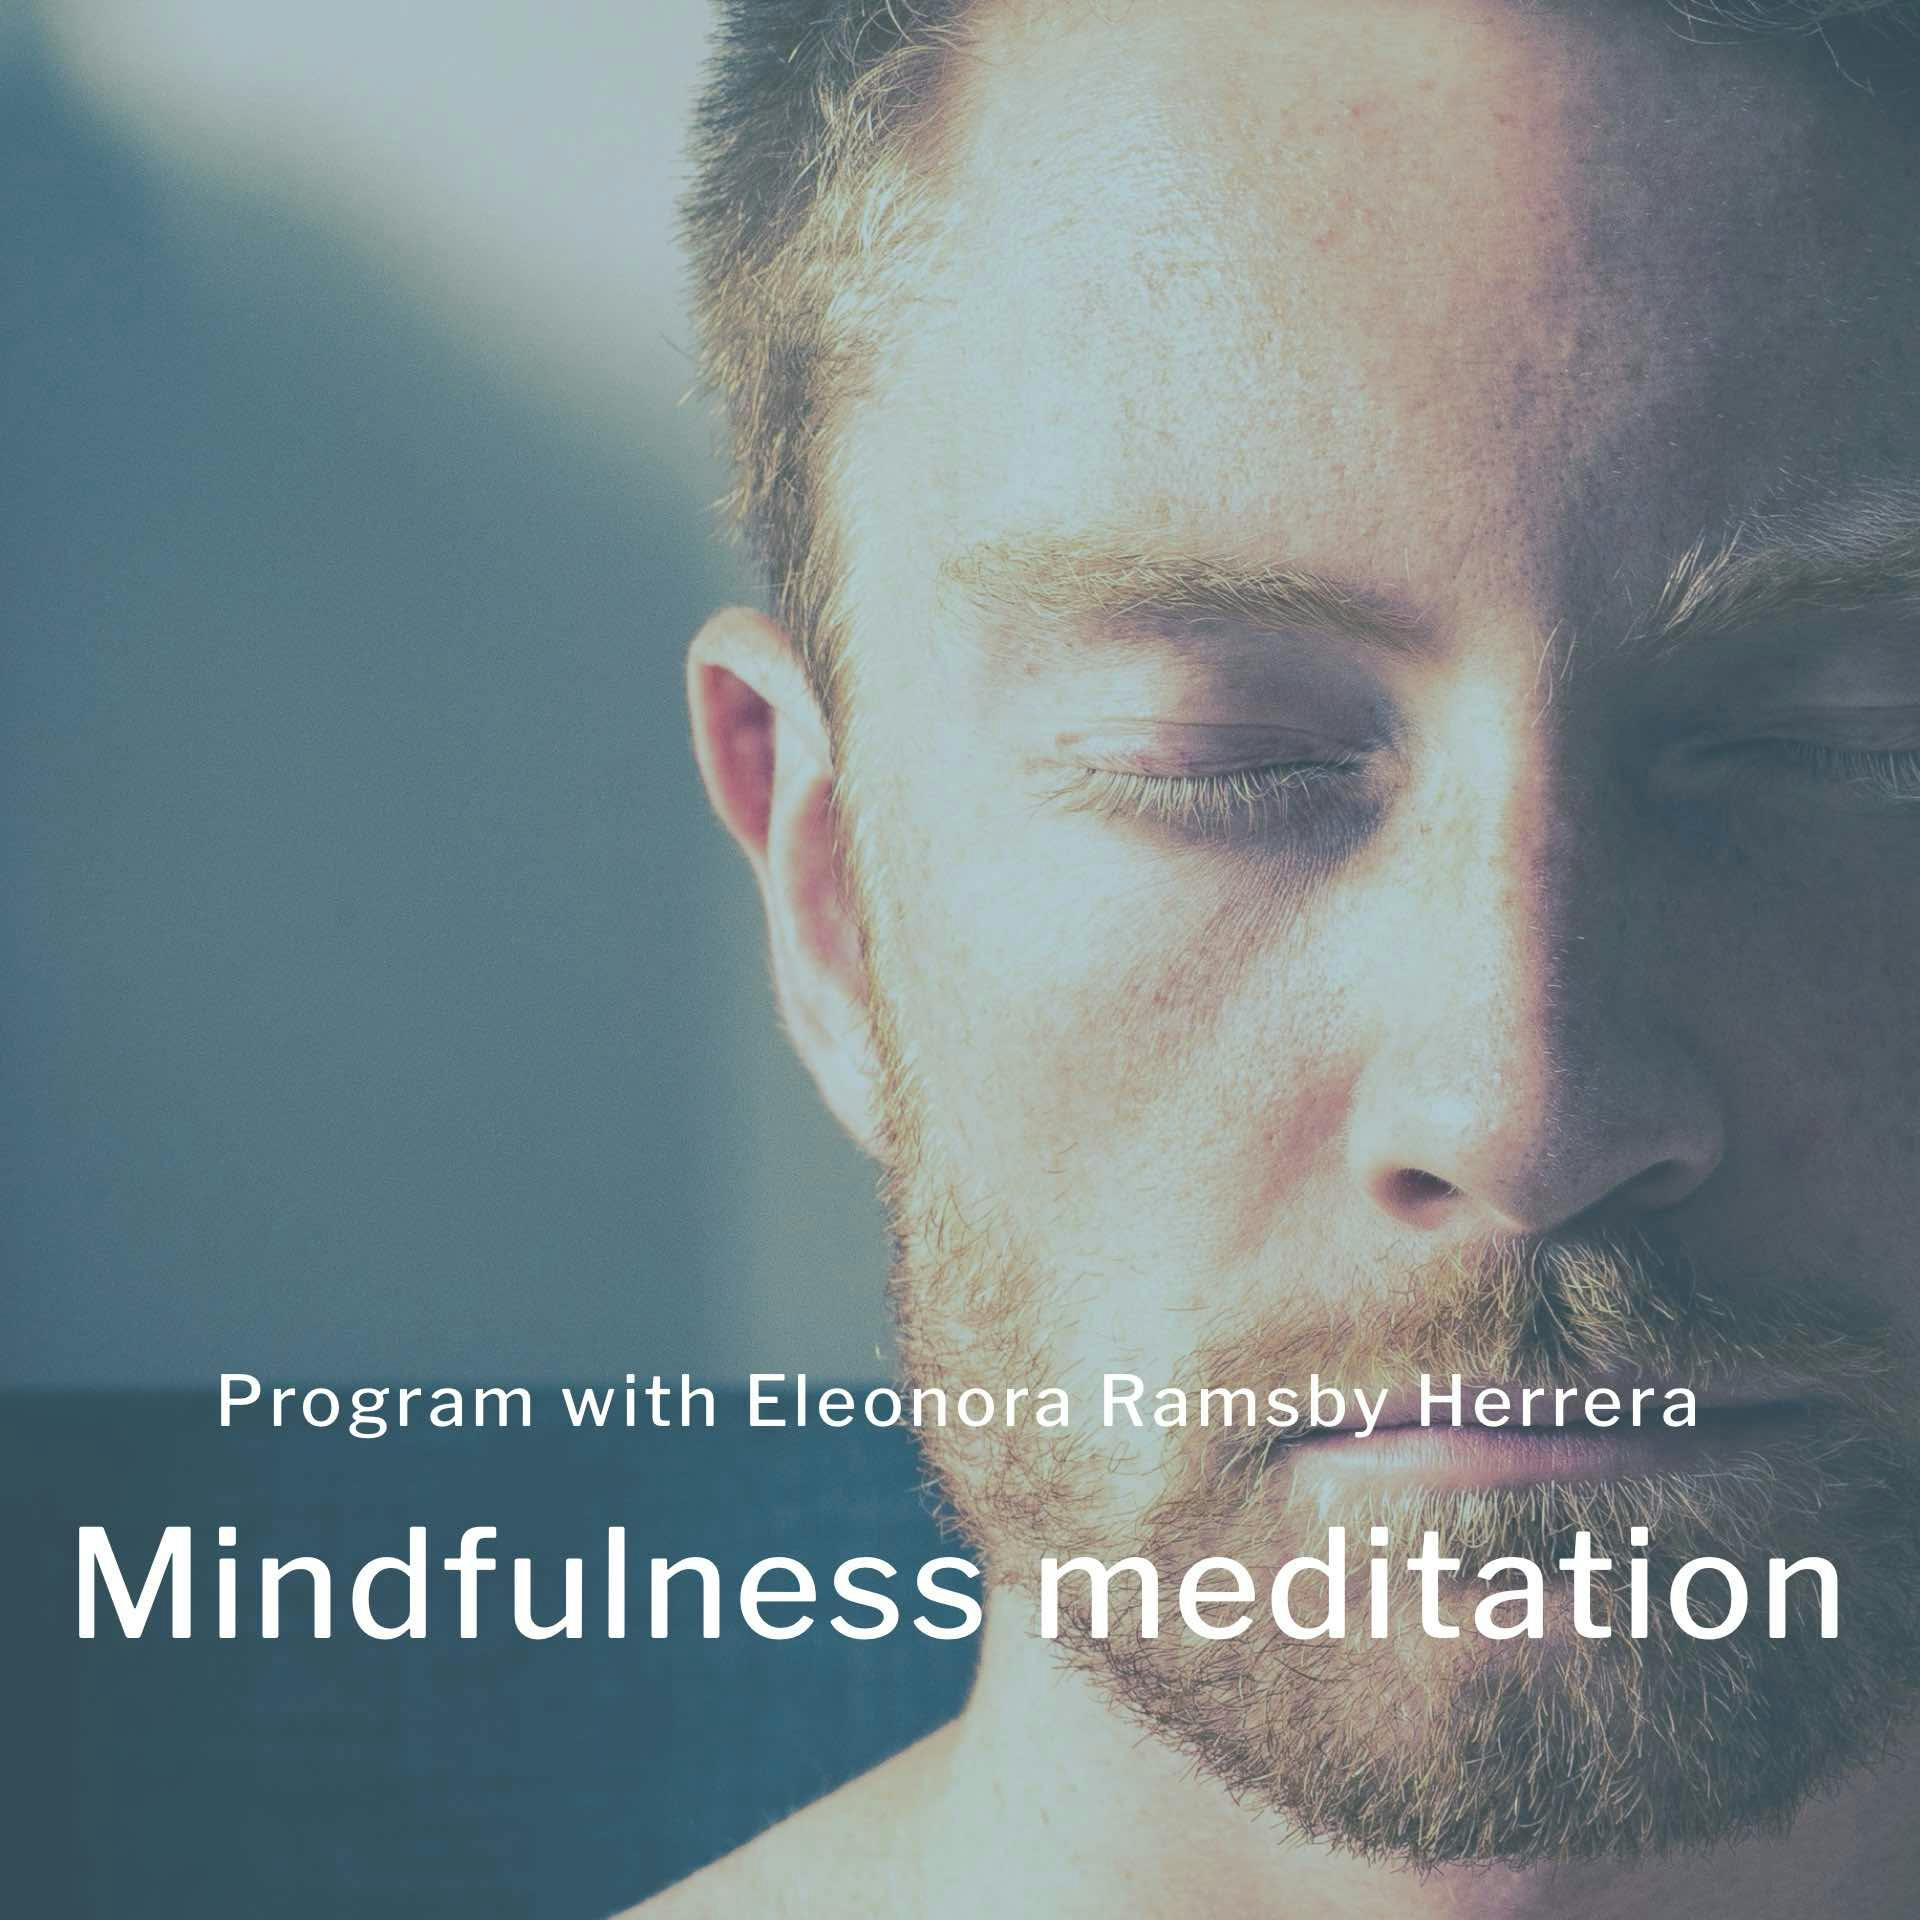 Join our online program and explore mindfulness meditation with Eleonora Ramsby Herrera.